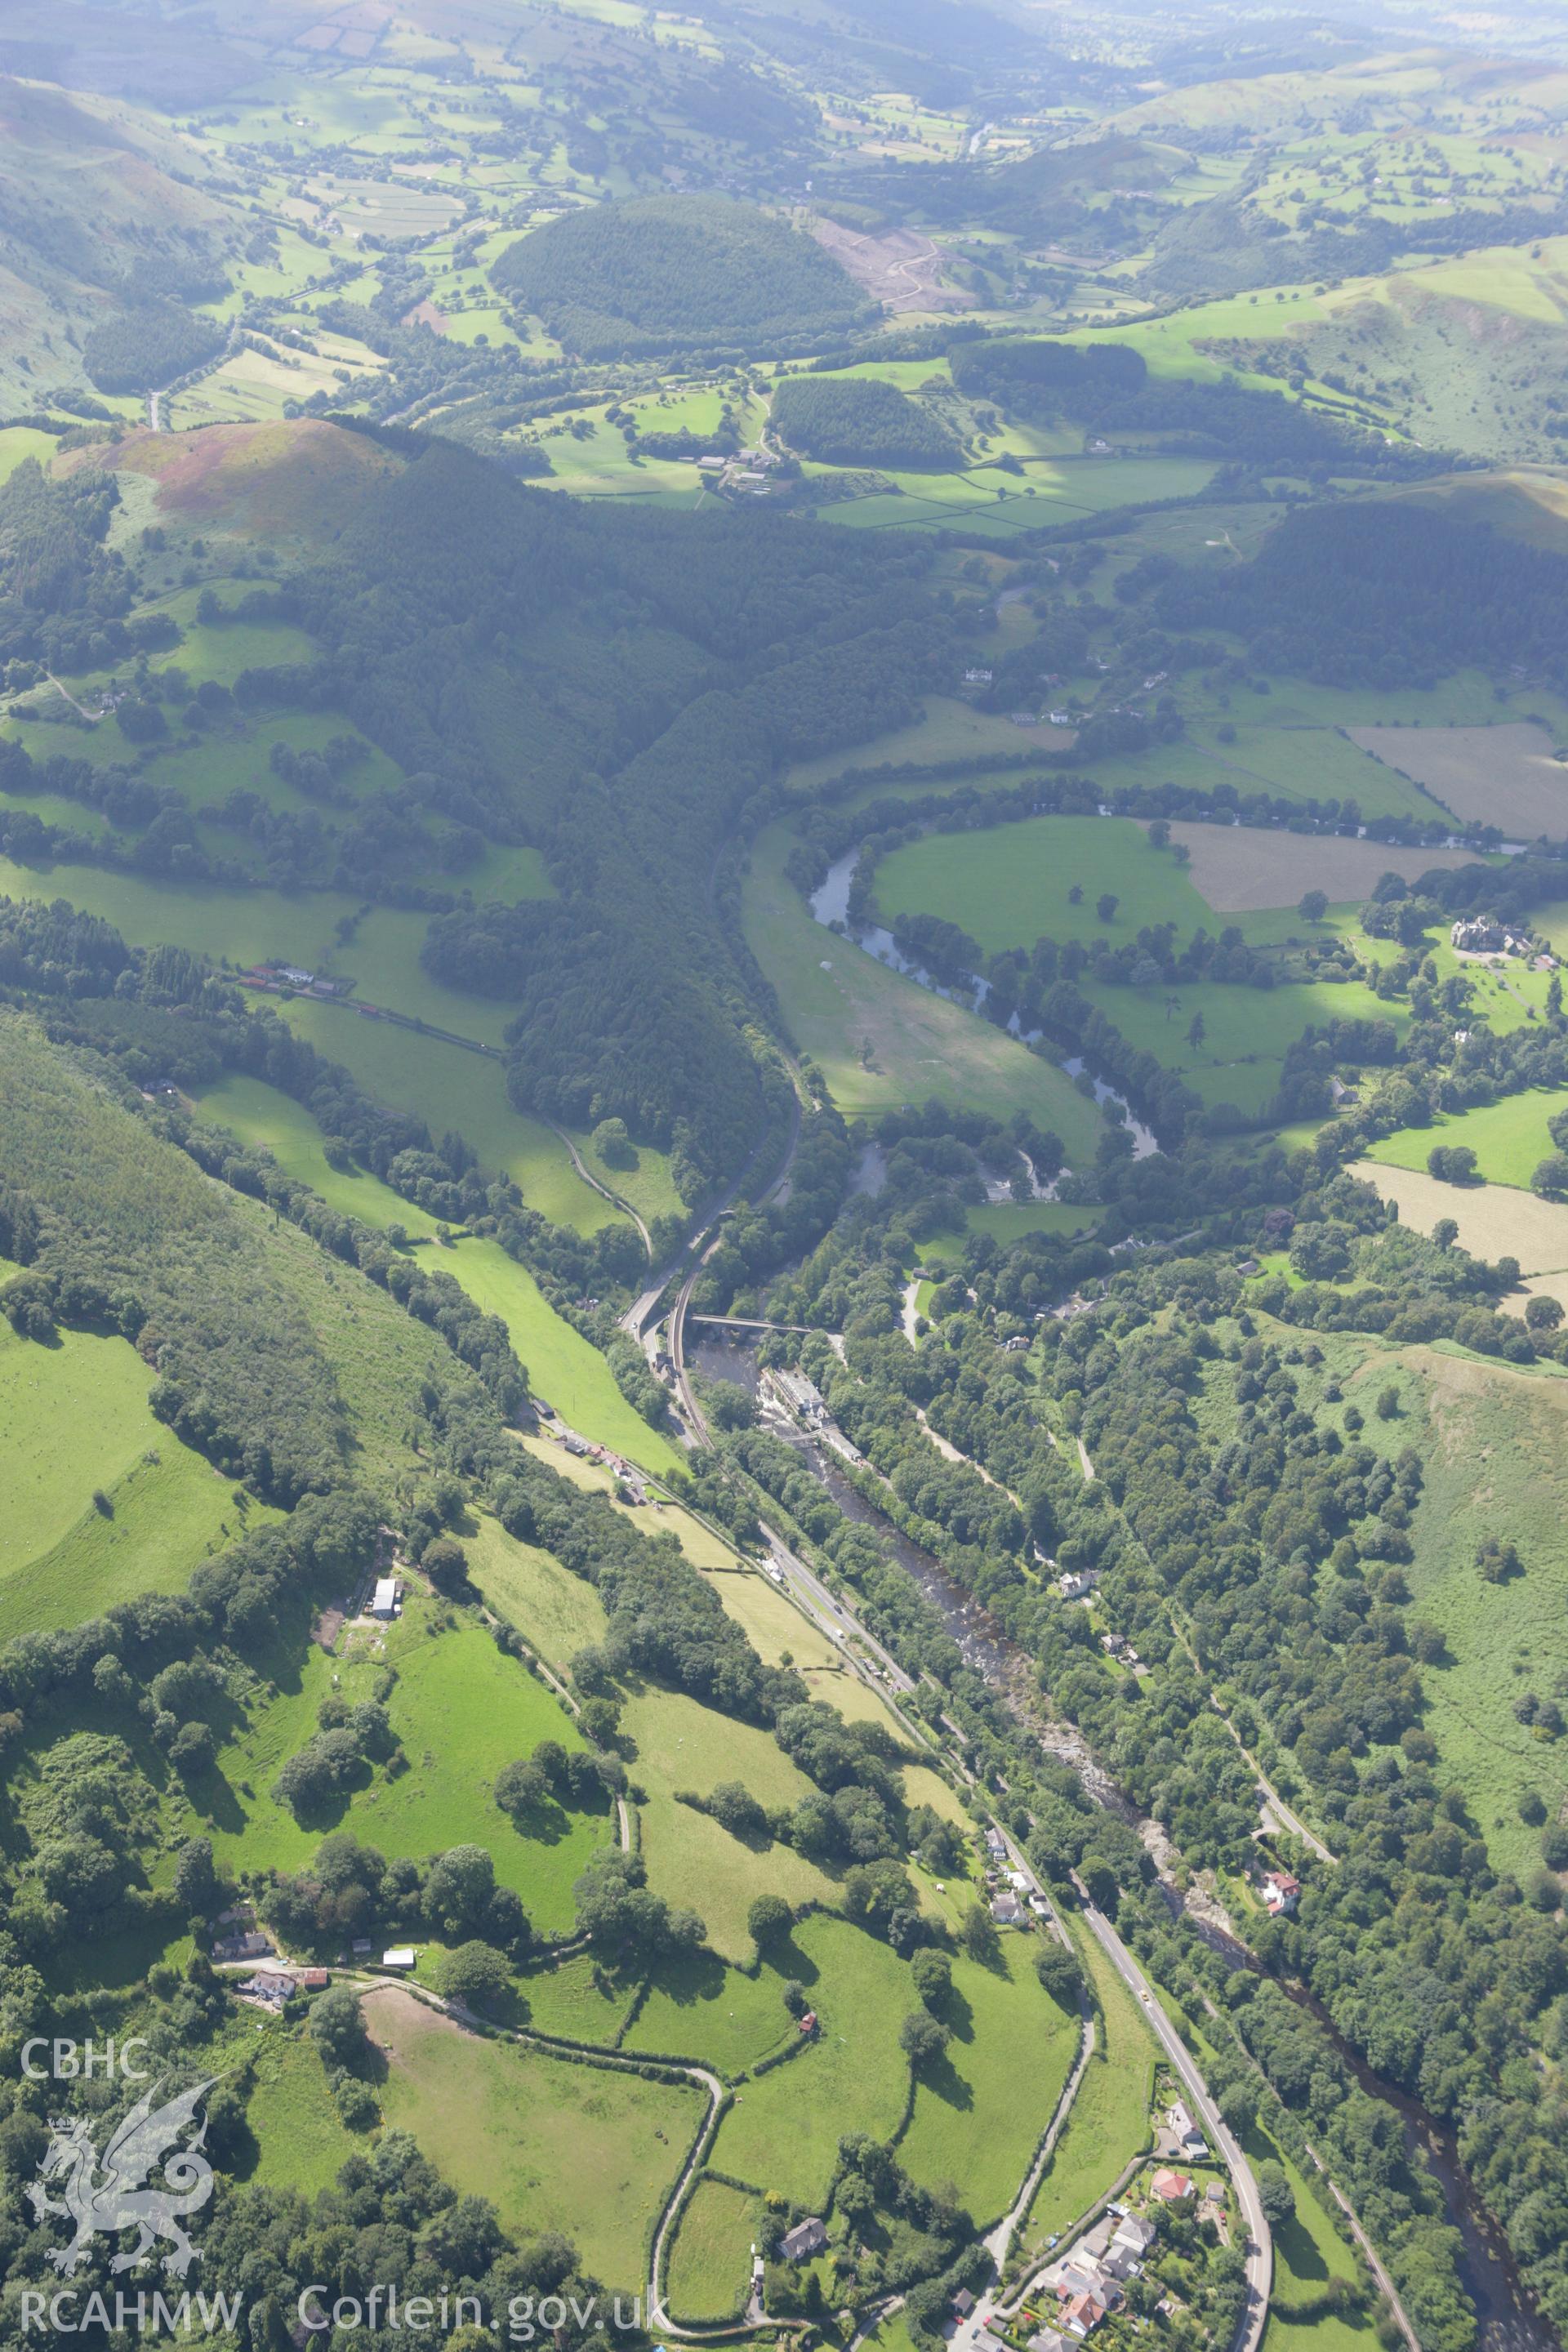 RCAHMW colour oblique aerial photograph of King's Bridge, Llantysilio, Berwyn. Taken on 31 July 2007 by Toby Driver